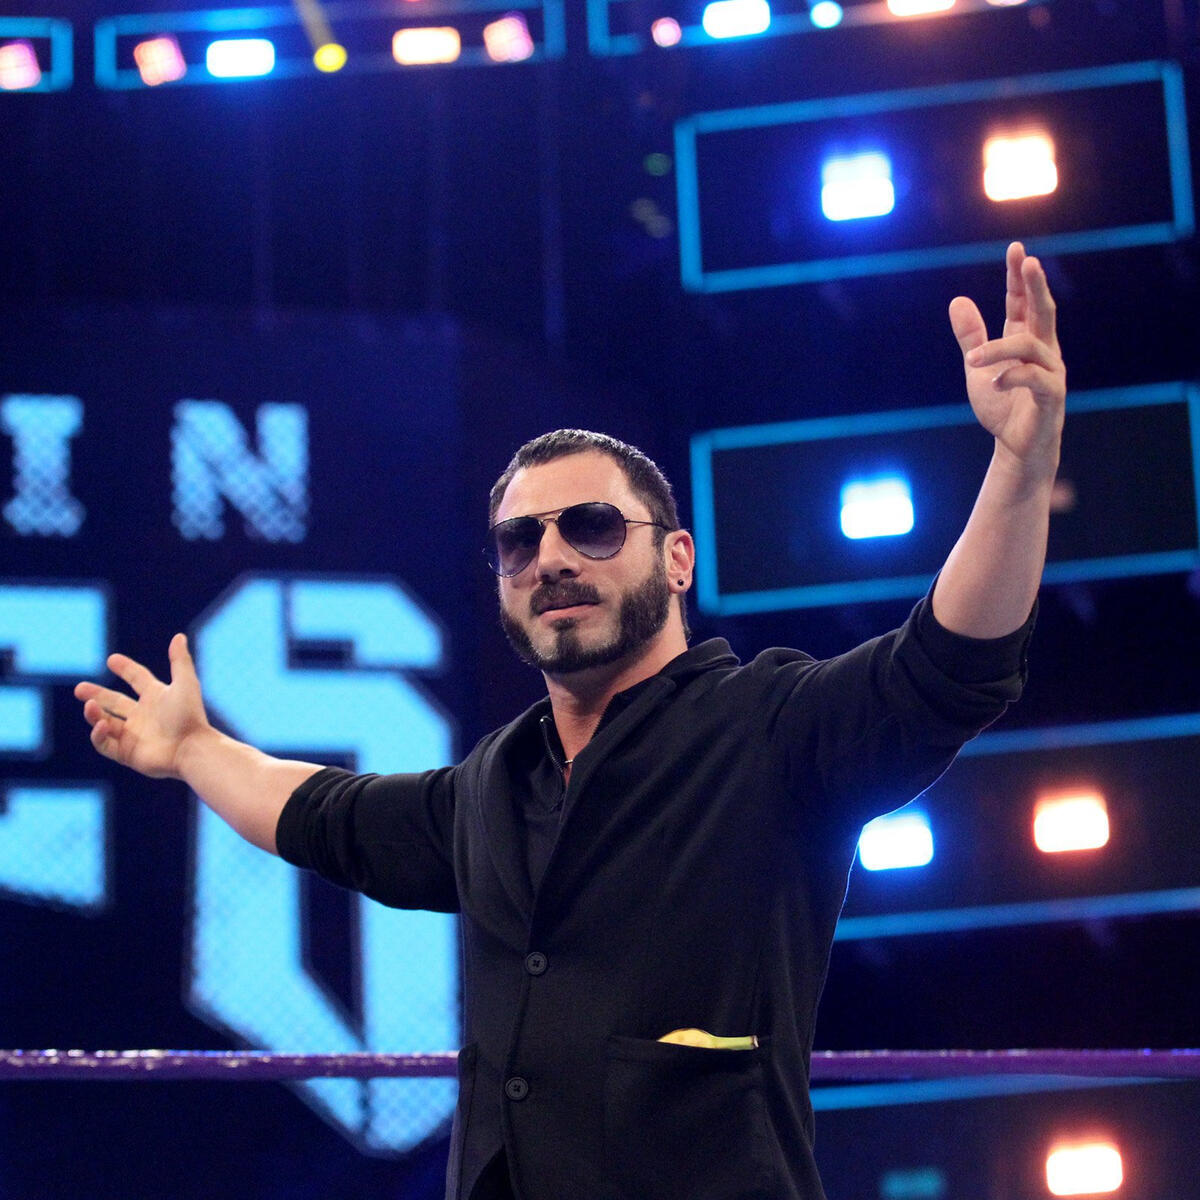 Austin Aries officially joins the Cruiserweight division.